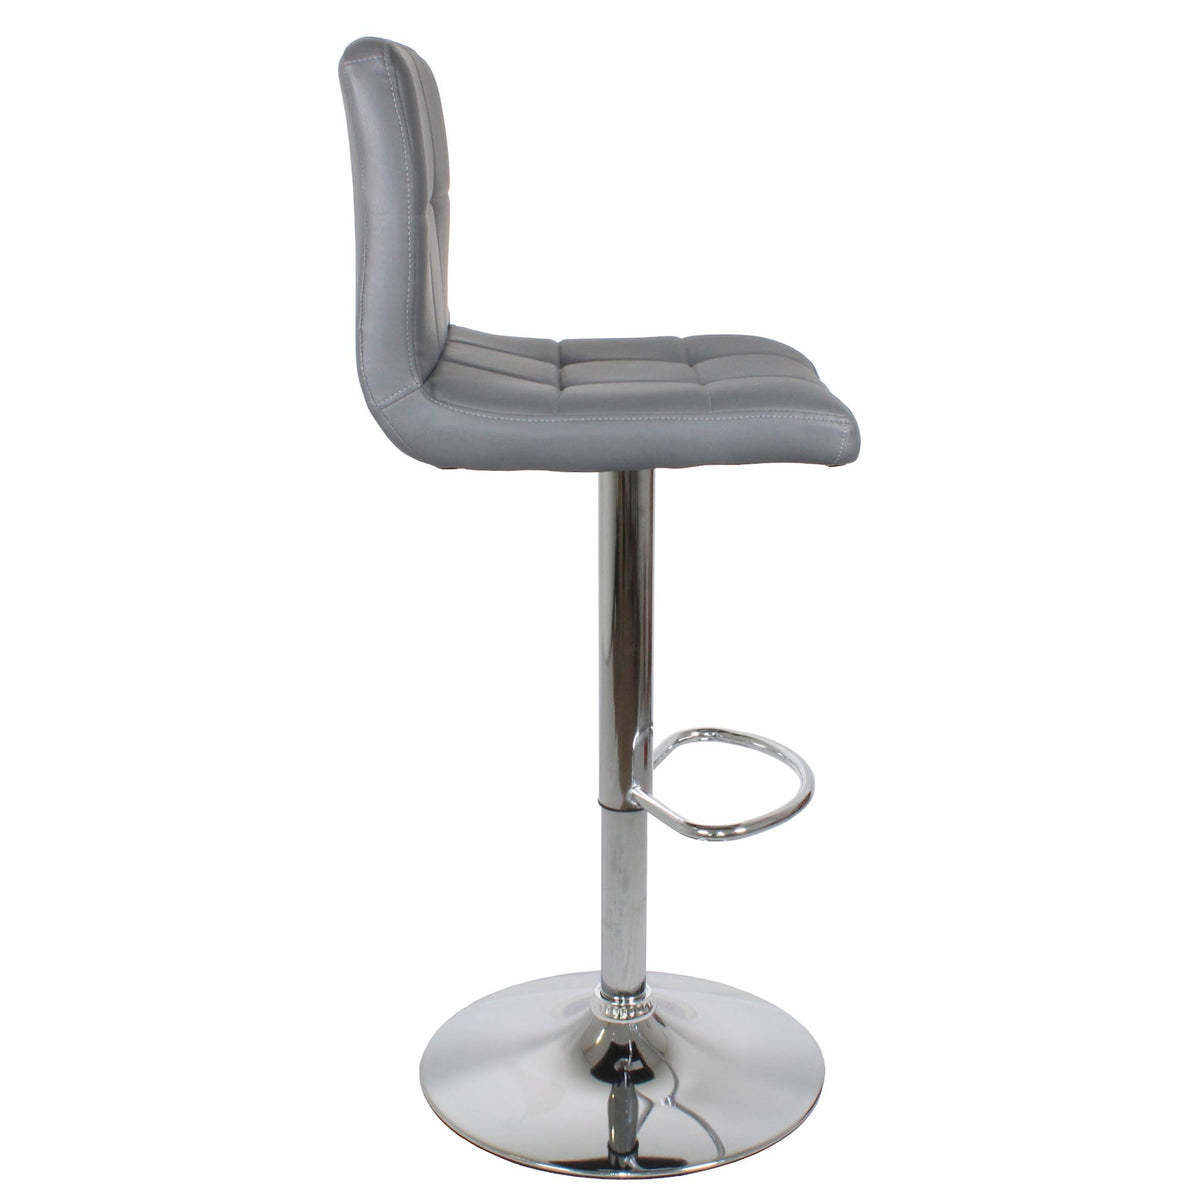 Side view of the Sky Grey Elton Adjustable Breakfast Bar Stool with footrest